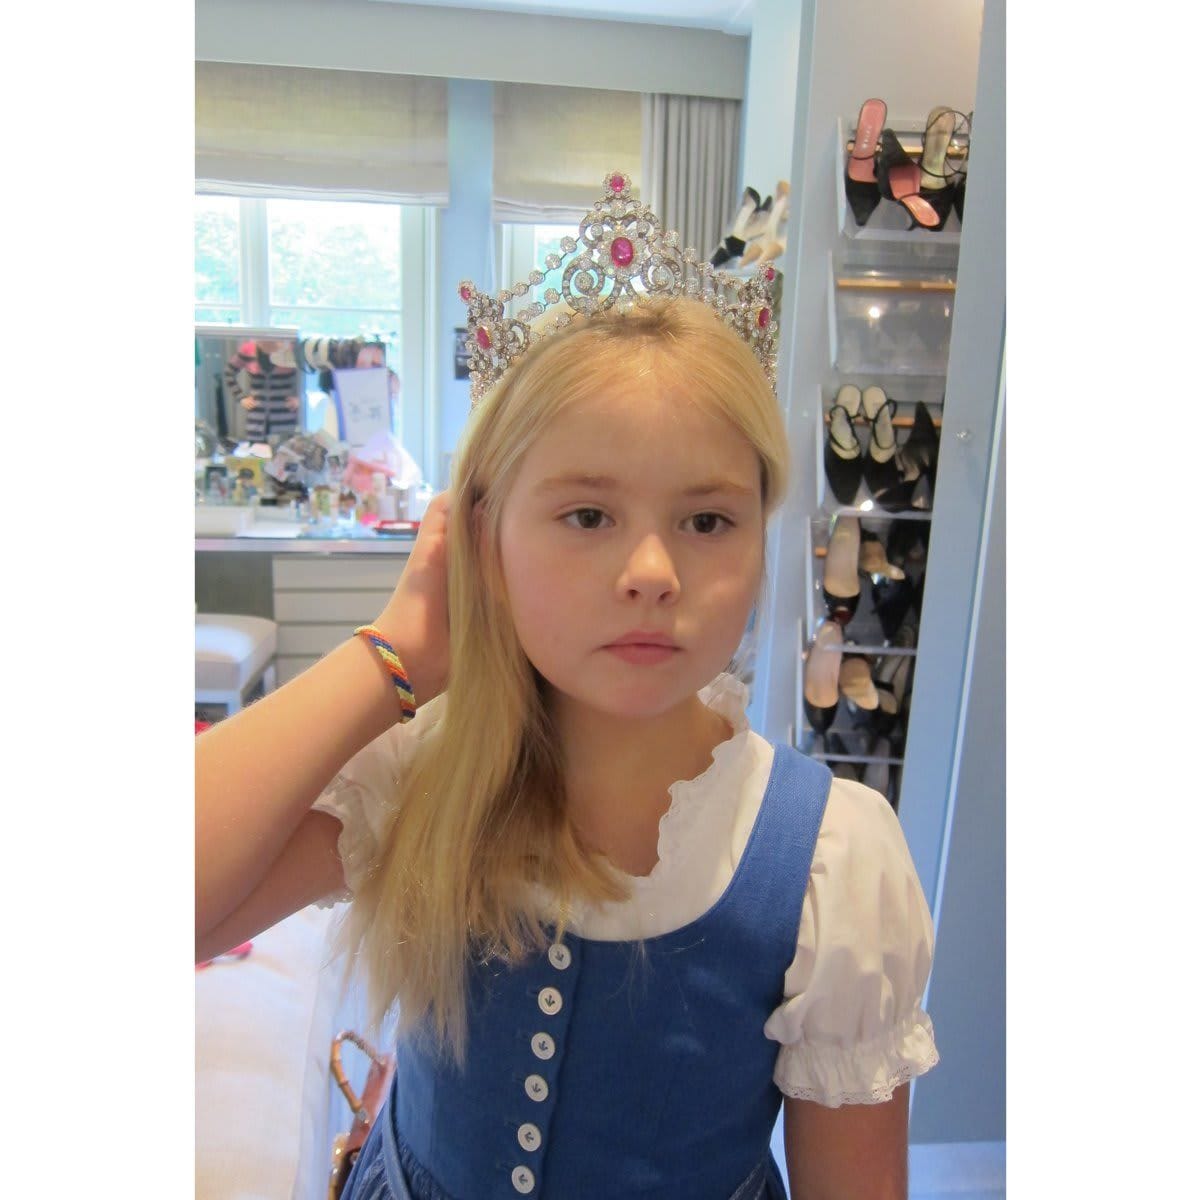 A photo of Amalia wearing a tiara was included in the book